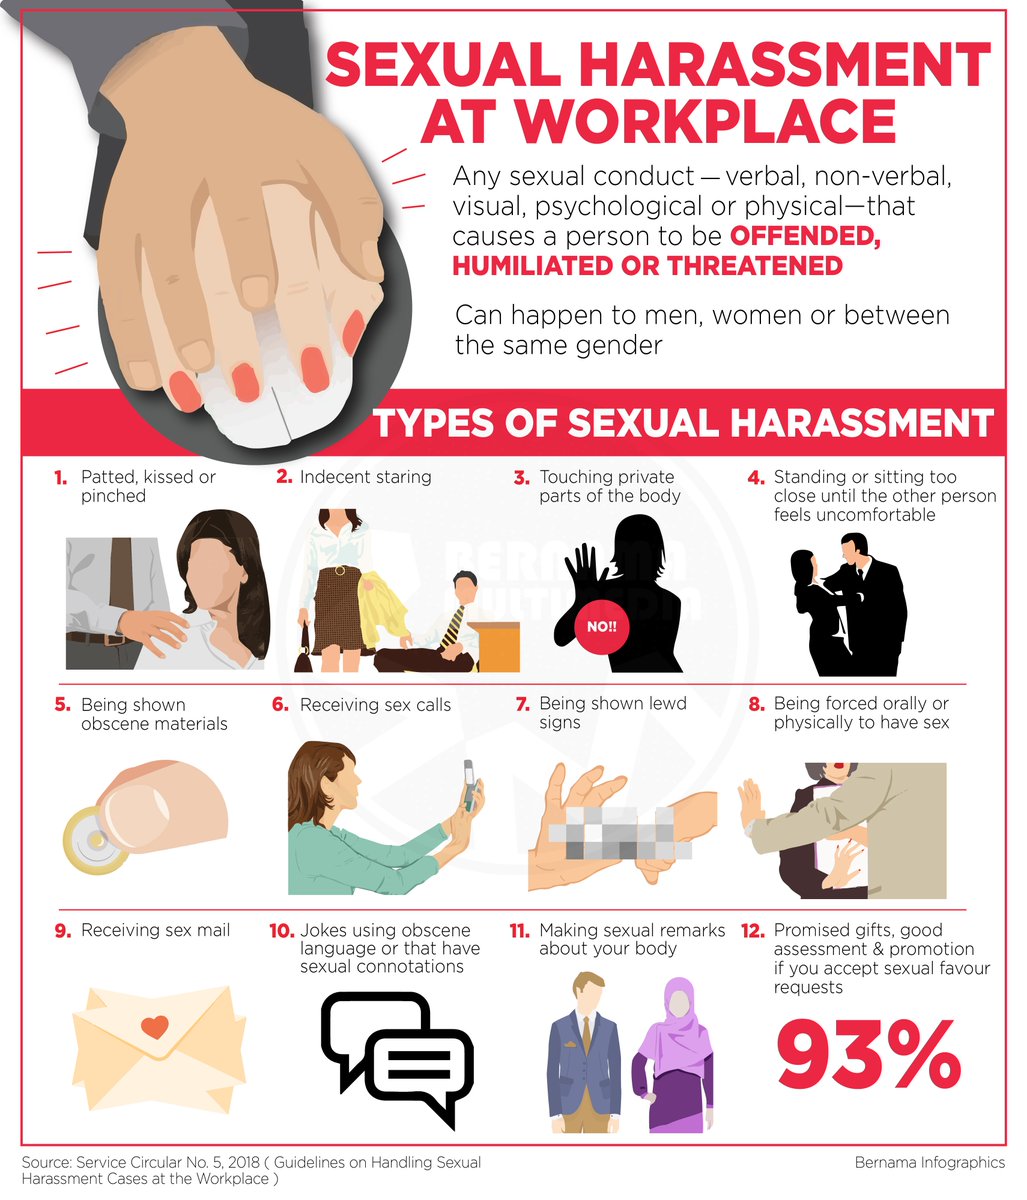 Bernama On Twitter Infographics Sexual Harassment At Workplace